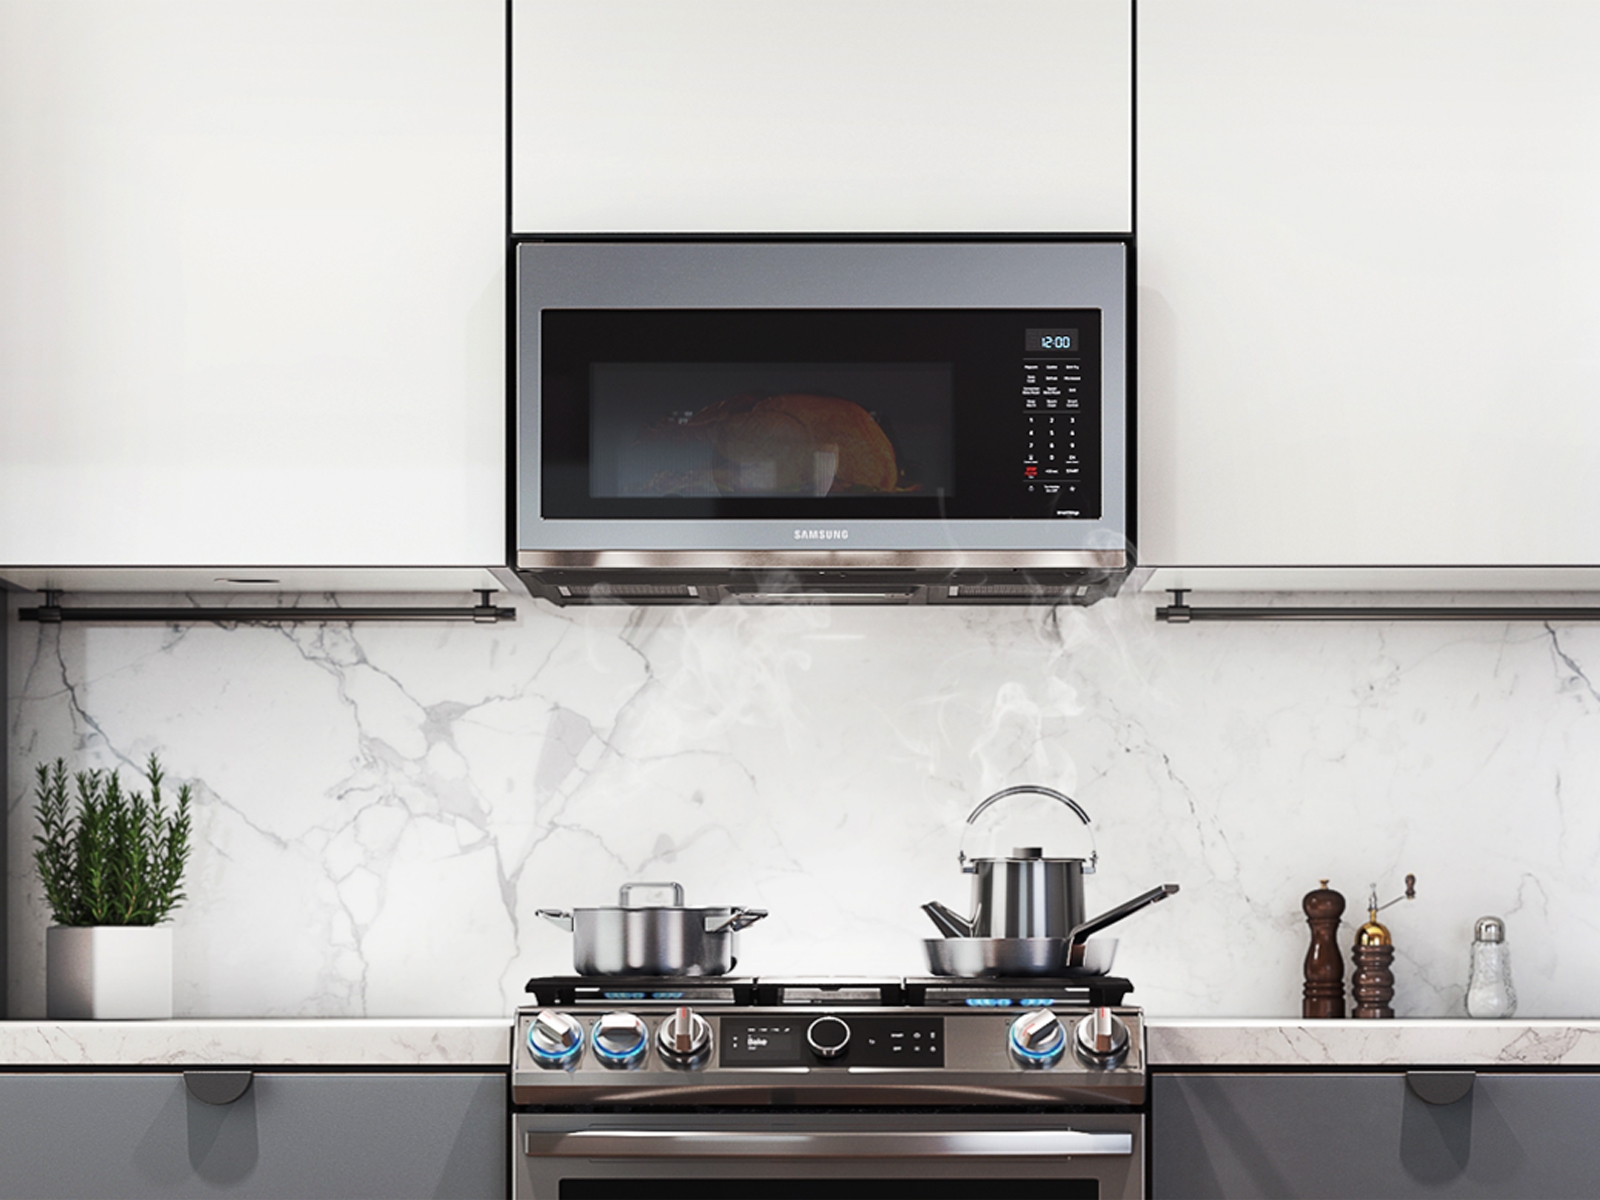 Thumbnail image of 1.7 cu ft. Smart Over-the-Range Microwave with Convection & Slim Fry™ in Stainless Steel